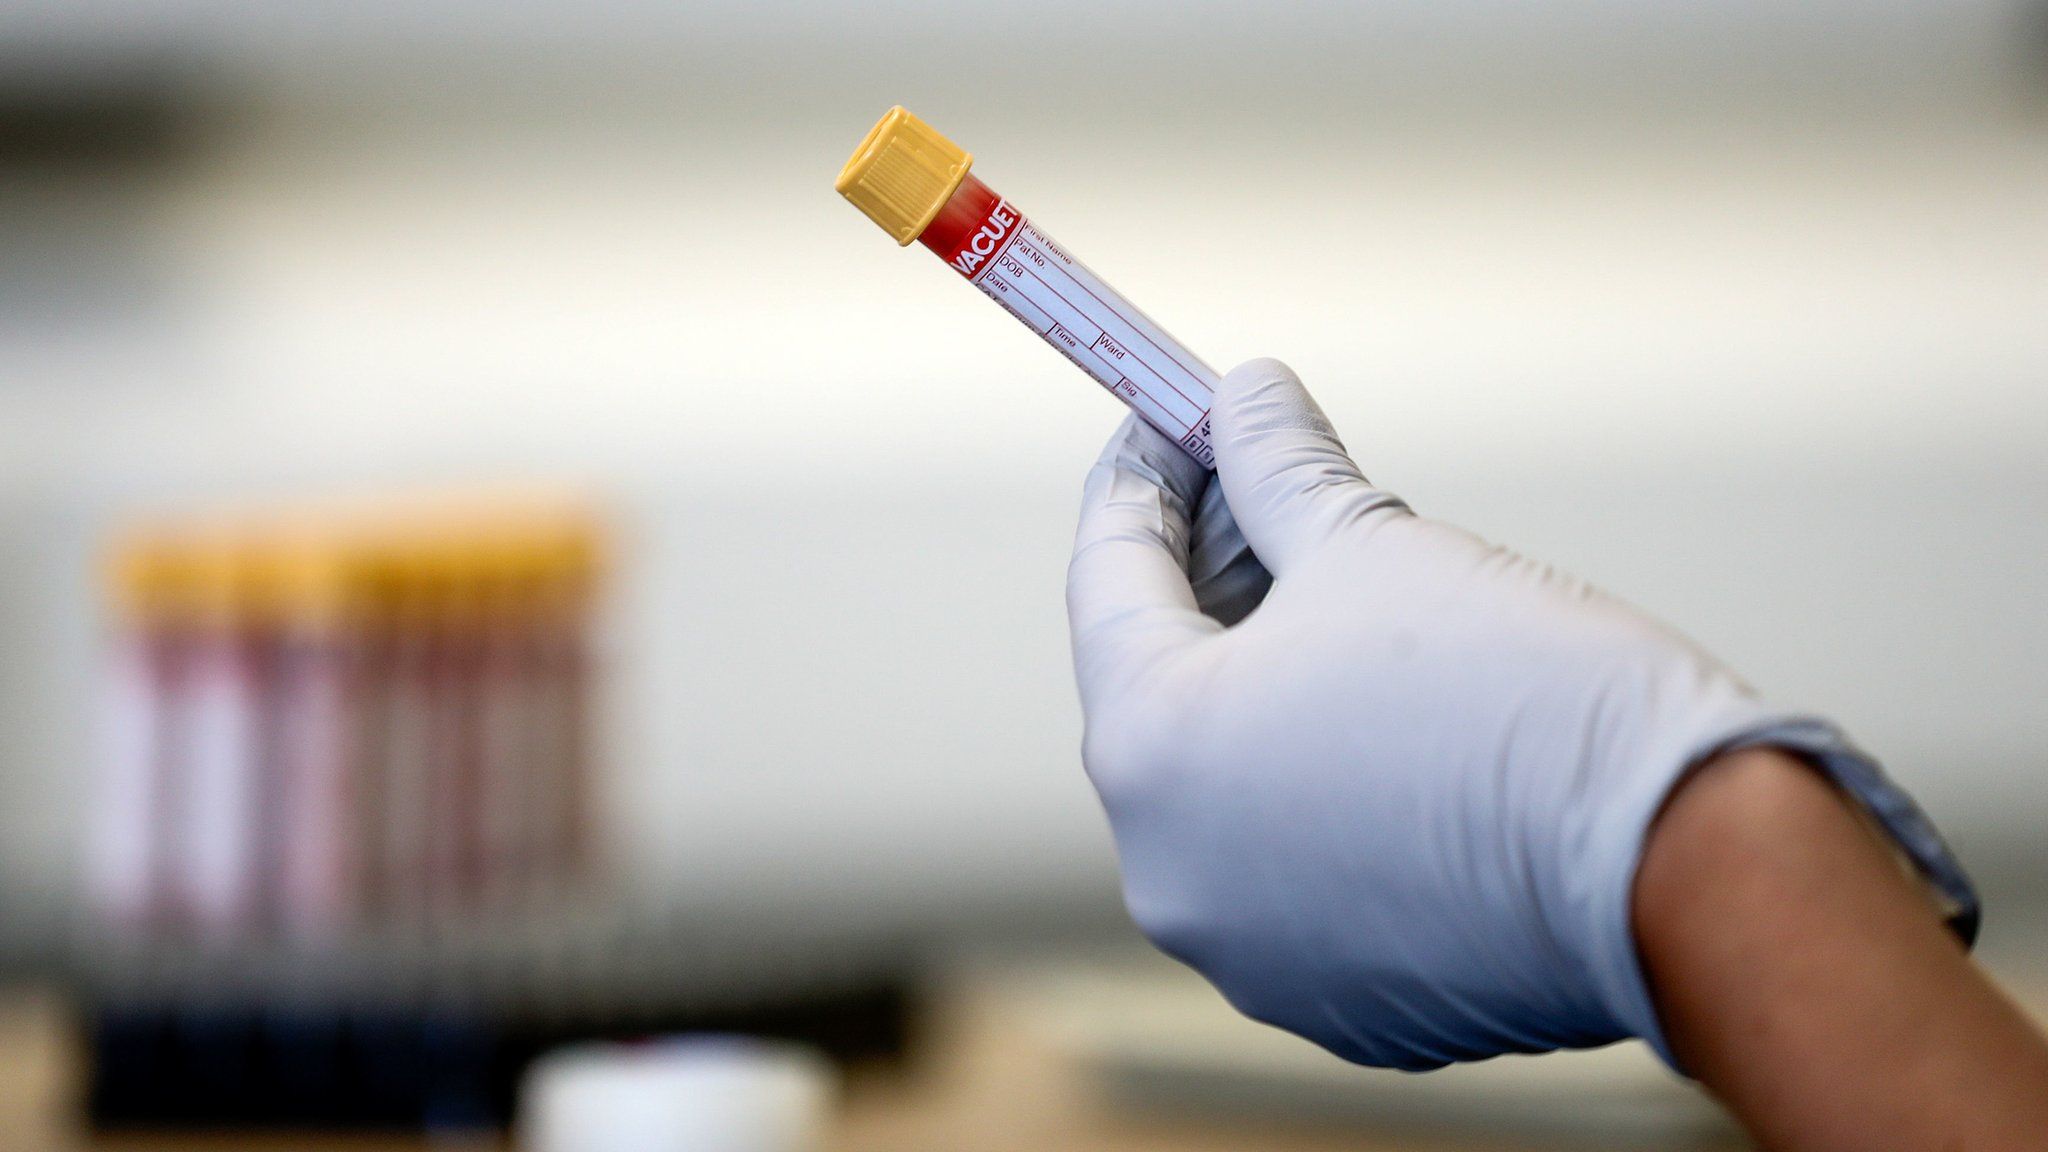 Blood sample being held in a gloved hand